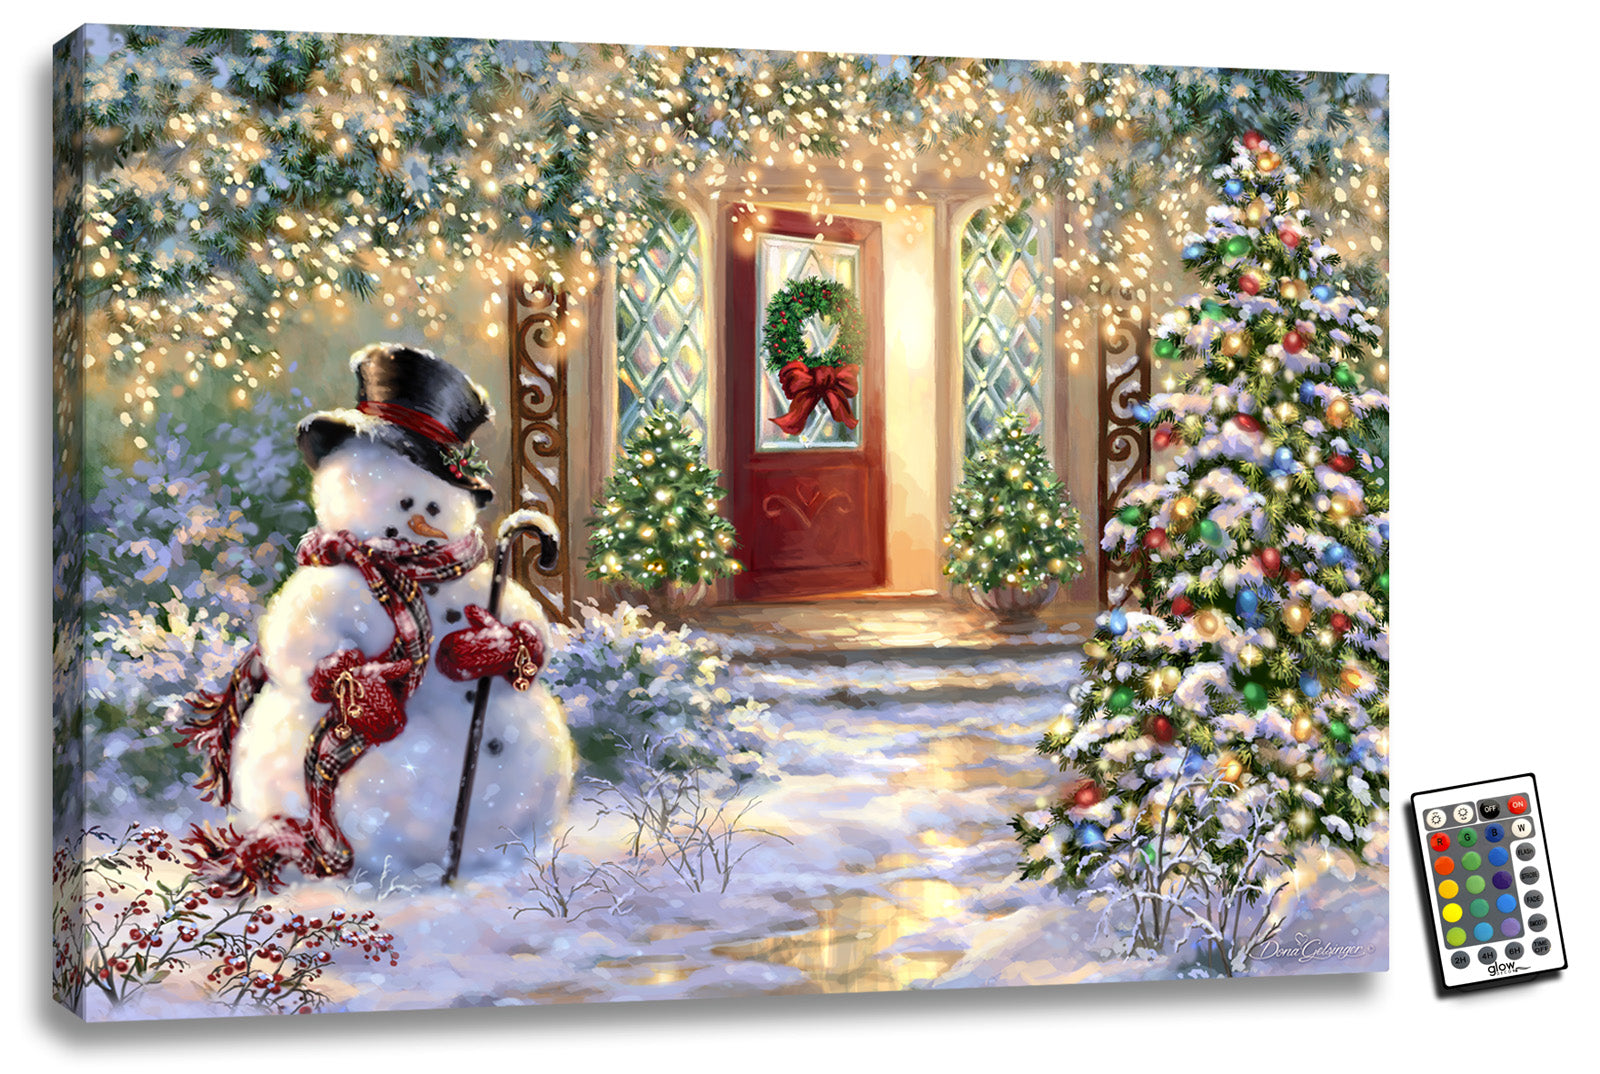 This beautiful 18x24 art piece captures the enchanting essence of winter wonderland romance, featuring a charming snowman with a top hat, scarf, mittens, and cane standing in front of an inviting open red door. Two small trees adorned with twinkling lights stand on either side of the door, creating a festive atmosphere that will fill your heart with joy.